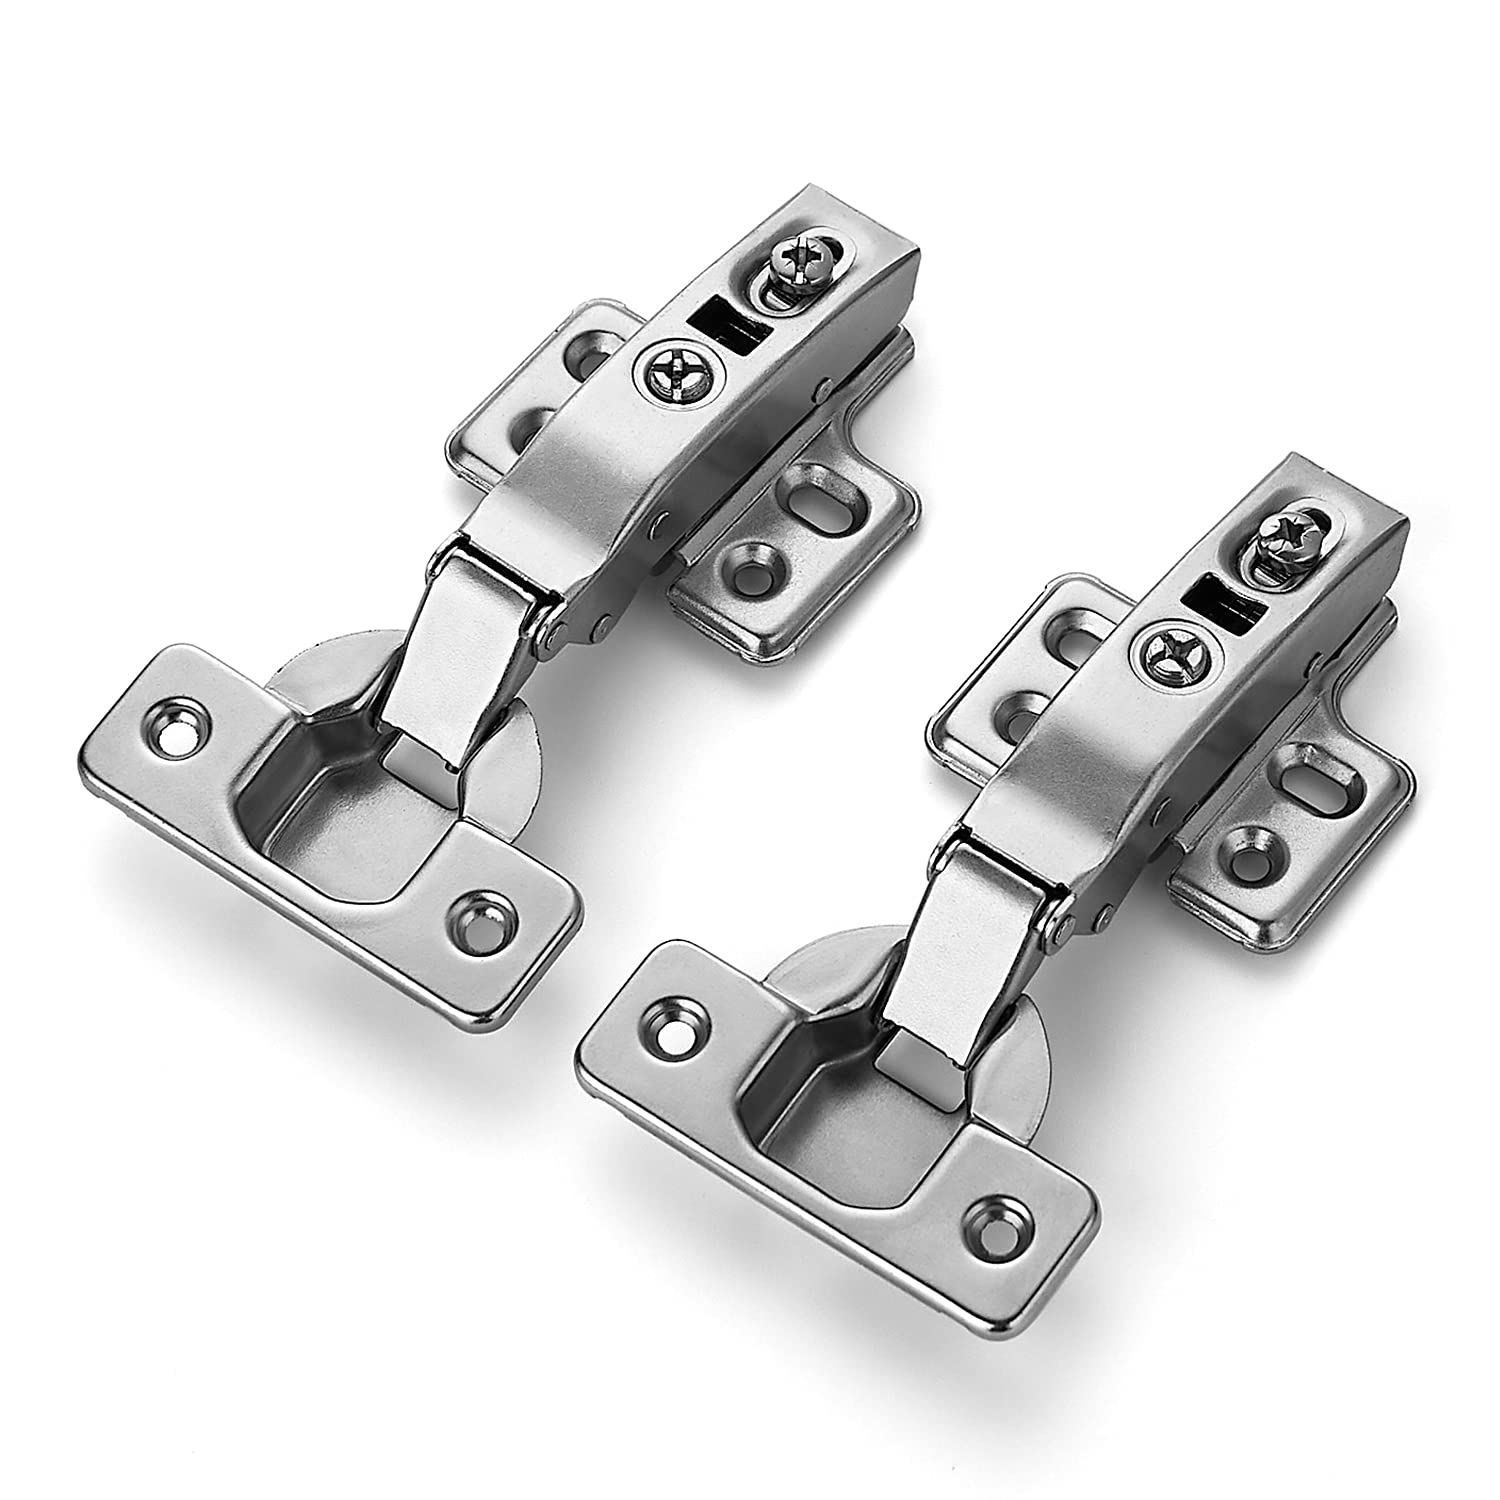 Soft Close Cabinet Hinges European Concealed Hinges Suitable For Kitchen Cabinets Door Stainless Steel Nickel -Homdiy